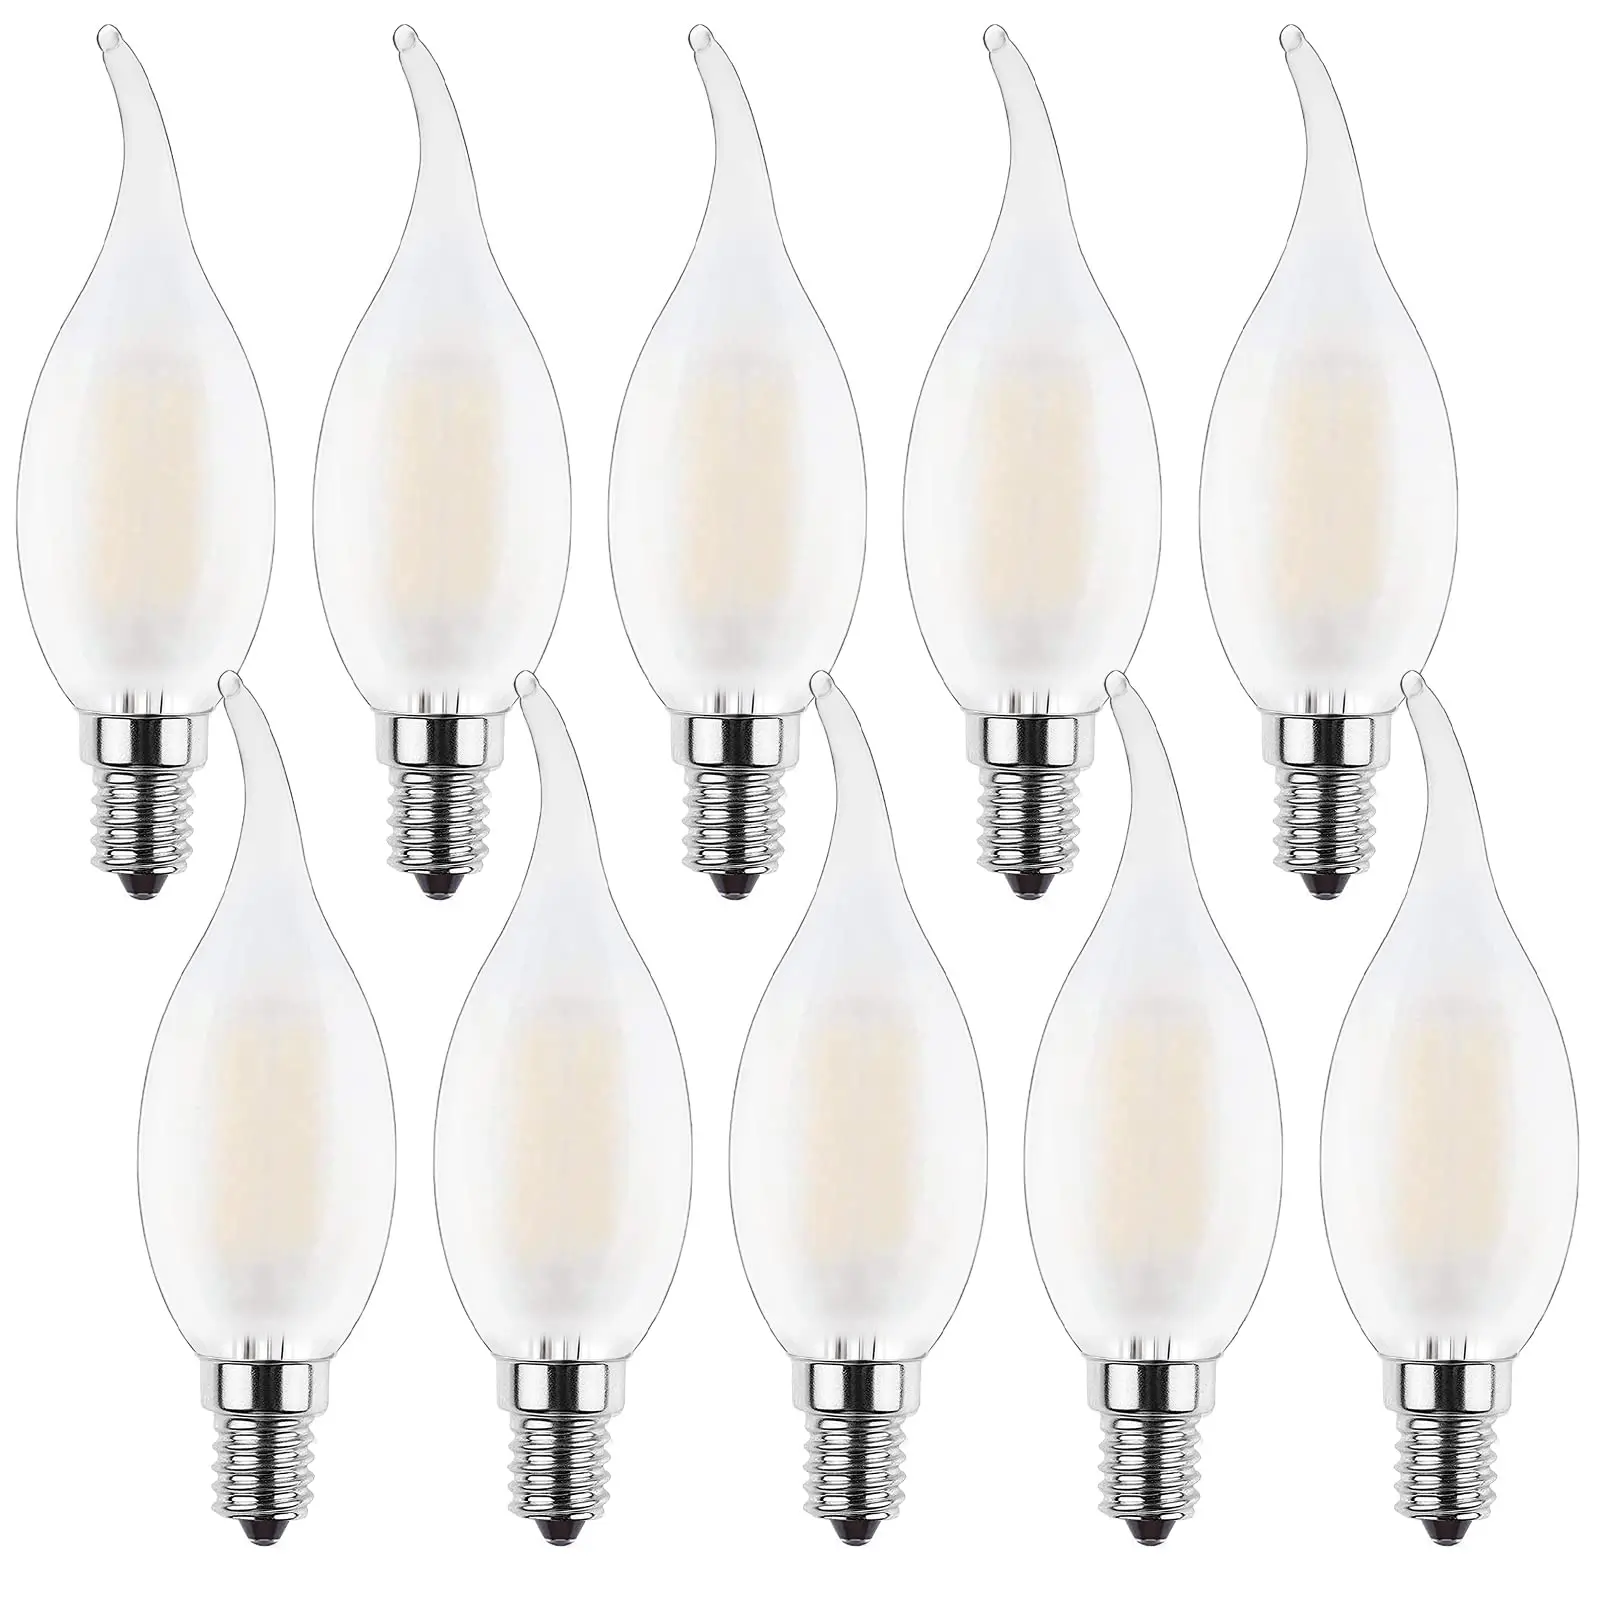 Led Candle light C35 Frosted E12 110V E14 220V 4W 6w  Dimmable Filament Bulbs Warm white 2700K Lamp For Chandelier Lighting